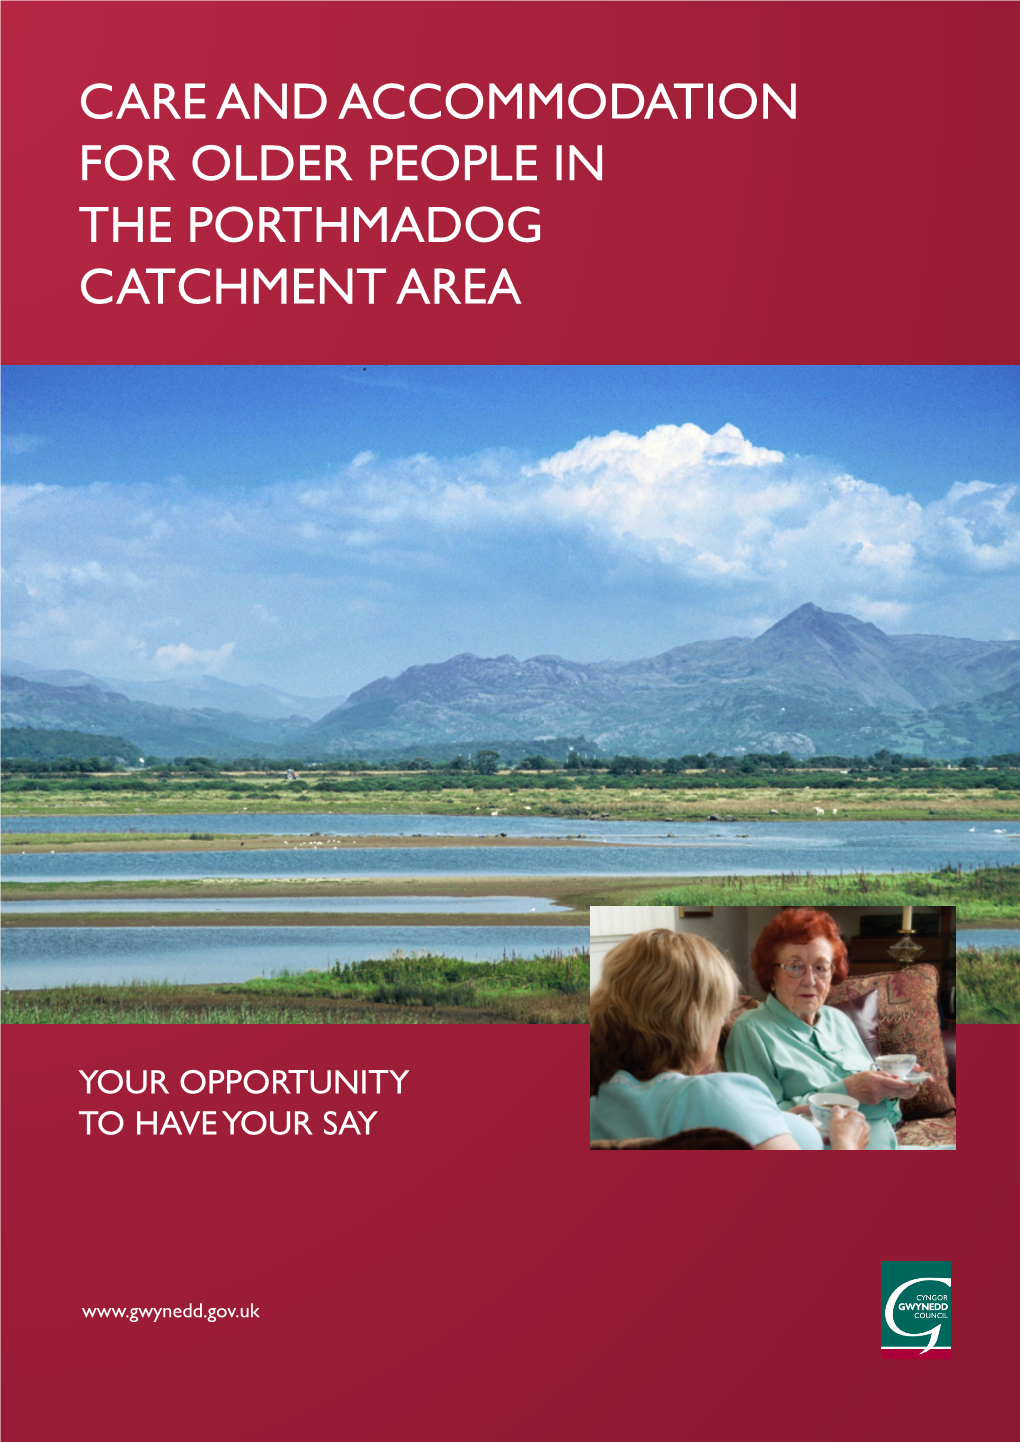 Care and Accommodation for Older People in the Porthmadog Catchment Area